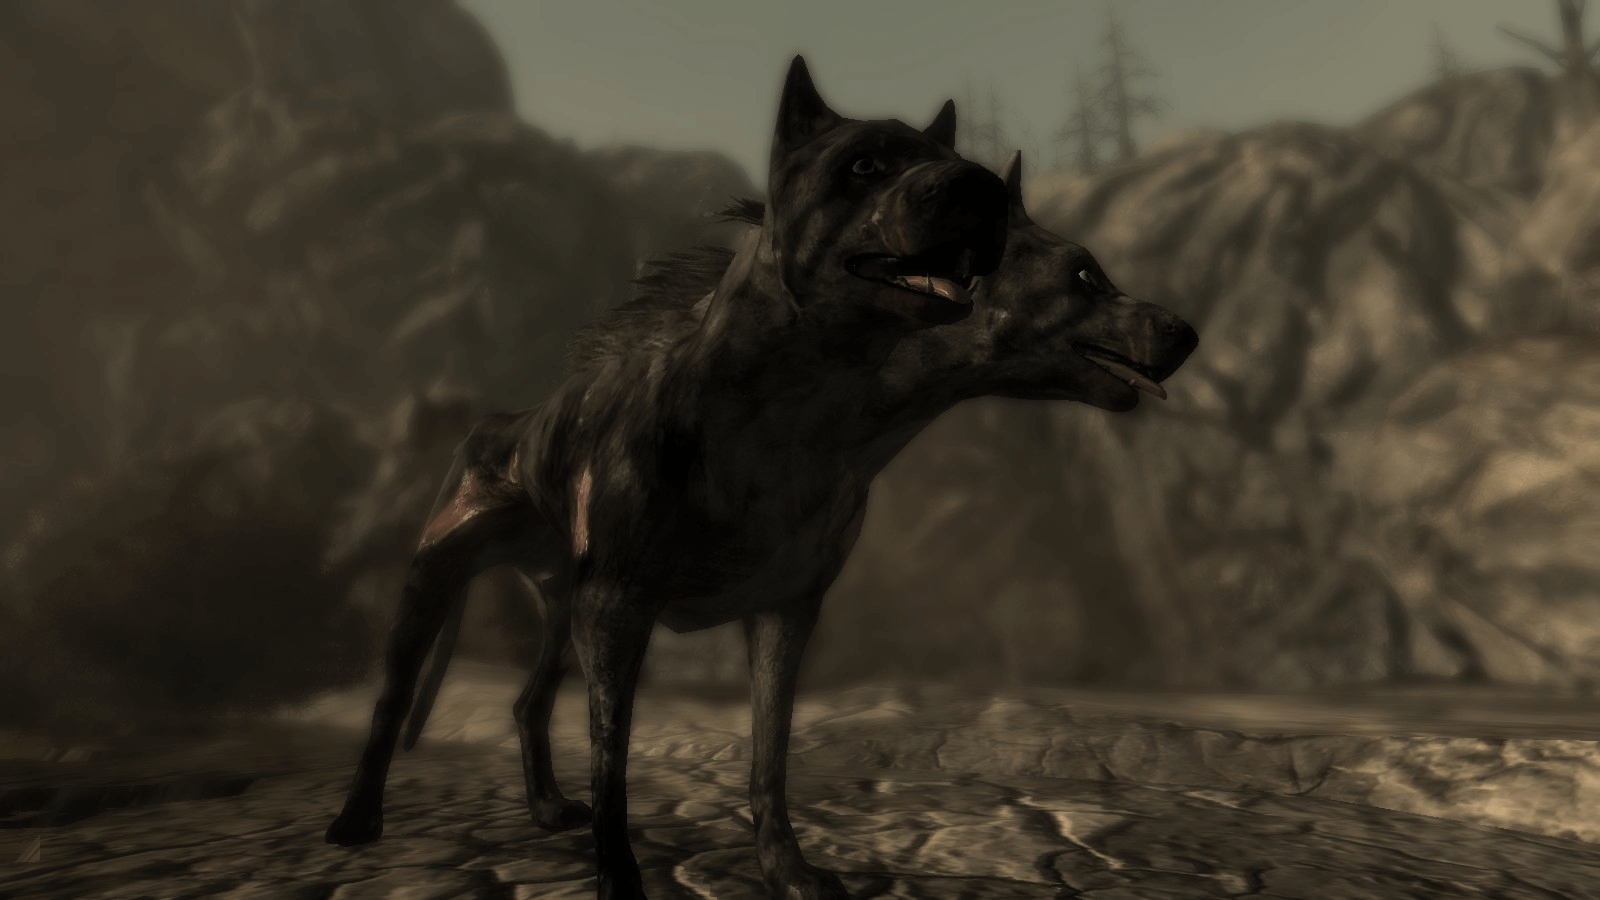 More creatures fallout 4 фото 39